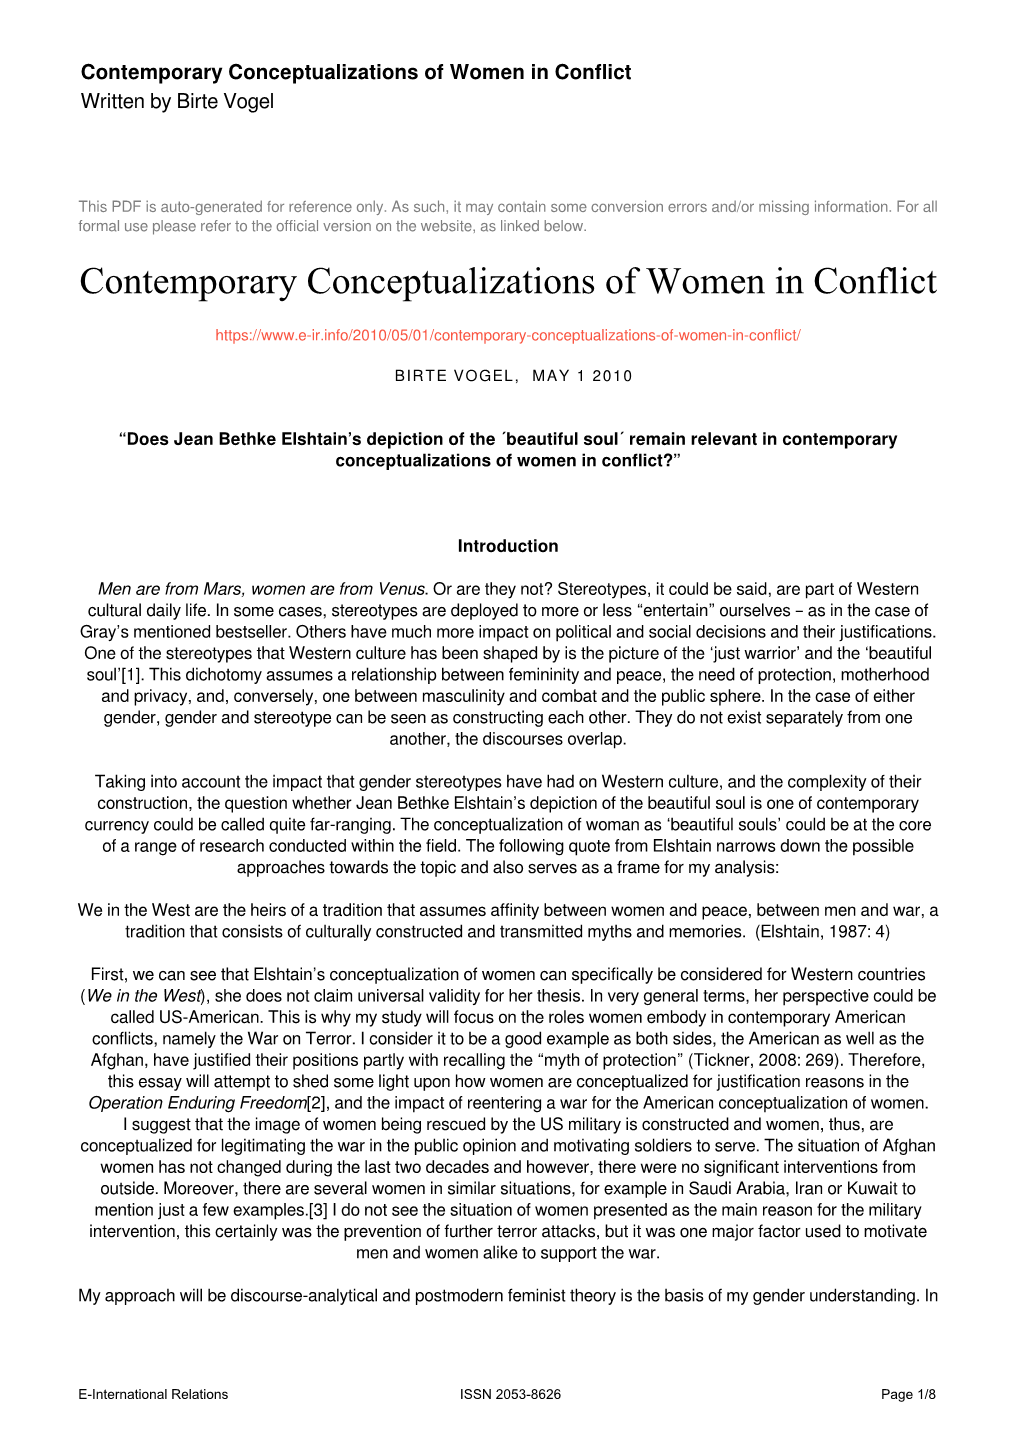 Contemporary Conceptualizations of Women in Conflict Written by Birte Vogel